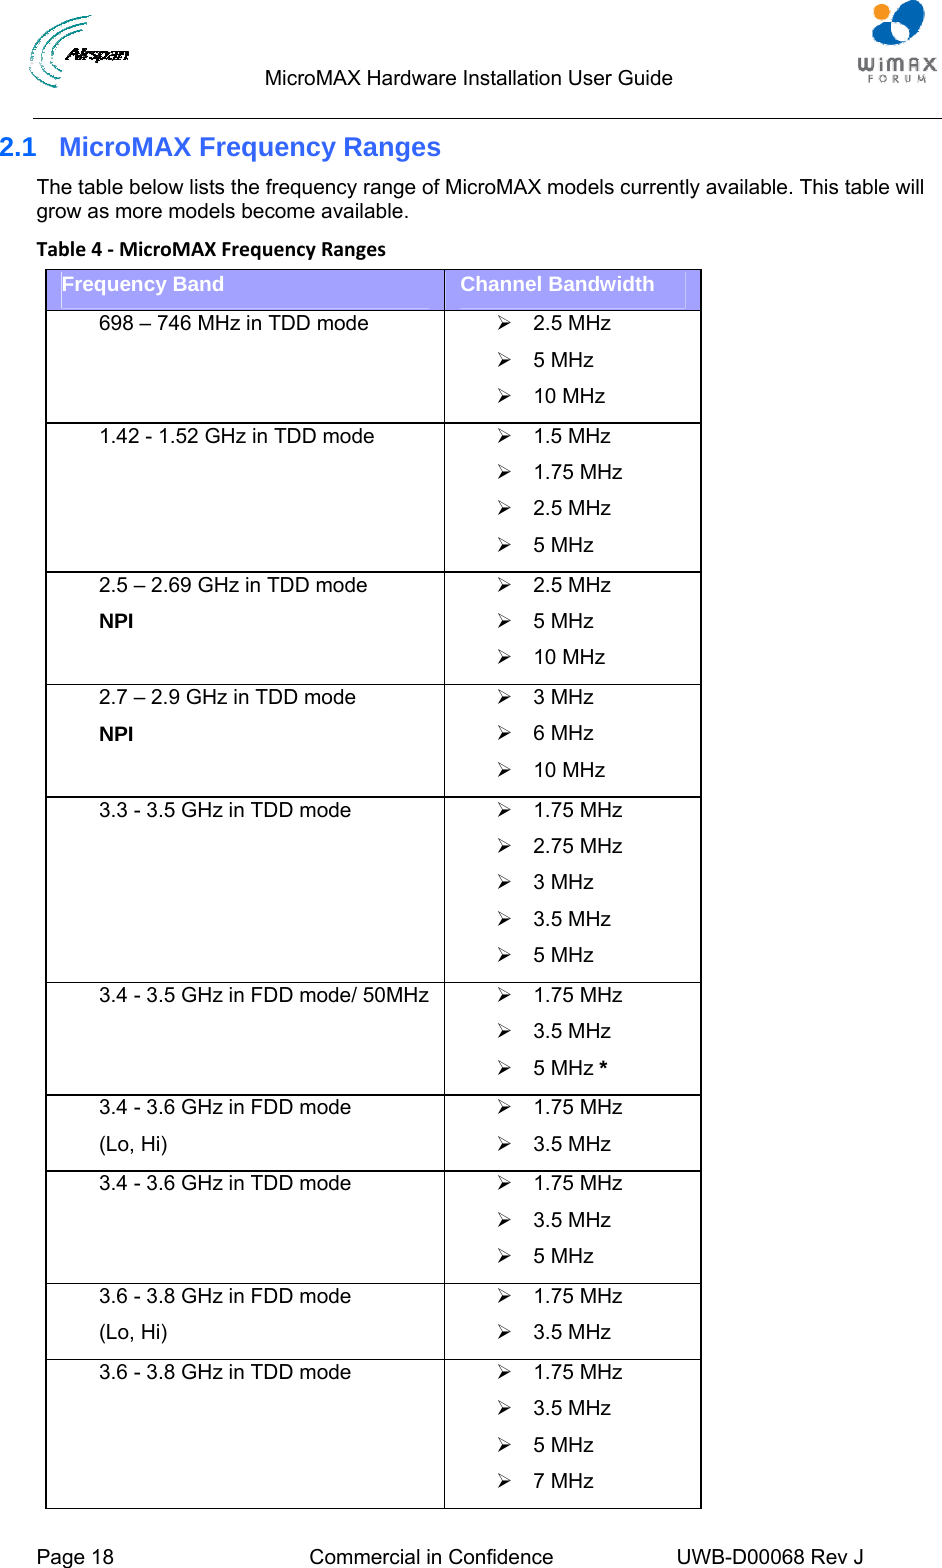                                  MicroMAX Hardware Installation User Guide  Page 18  Commercial in Confidence  UWB-D00068 Rev J   2.1  MicroMAX Frequency Ranges The table below lists the frequency range of MicroMAX models currently available. This table will grow as more models become available. Table4‐MicroMAXFrequencyRangesFrequency Band  Channel Bandwidth 698 – 746 MHz in TDD mode  ¾ 2.5 MHz ¾ 5 MHz ¾ 10 MHz 1.42 - 1.52 GHz in TDD mode  ¾ 1.5 MHz   ¾  1.75 MHz  ¾ 2.5 MHz ¾ 5 MHz 2.5 – 2.69 GHz in TDD mode NPI ¾ 2.5 MHz ¾ 5 MHz ¾ 10 MHz 2.7 – 2.9 GHz in TDD mode NPI ¾ 3 MHz ¾ 6 MHz ¾ 10 MHz 3.3 - 3.5 GHz in TDD mode  ¾  1.75 MHz  ¾ 2.75 MHz ¾ 3 MHz ¾ 3.5 MHz ¾ 5 MHz 3.4 - 3.5 GHz in FDD mode/ 50MHz  ¾ 1.75 MHz ¾ 3.5 MHz ¾ 5 MHz * 3.4 - 3.6 GHz in FDD mode (Lo, Hi) ¾ 1.75 MHz ¾ 3.5 MHz 3.4 - 3.6 GHz in TDD mode  ¾ 1.75 MHz ¾ 3.5 MHz ¾ 5 MHz 3.6 - 3.8 GHz in FDD mode (Lo, Hi) ¾ 1.75 MHz ¾ 3.5 MHz 3.6 - 3.8 GHz in TDD mode  ¾ 1.75 MHz ¾ 3.5 MHz ¾ 5 MHz ¾ 7 MHz 